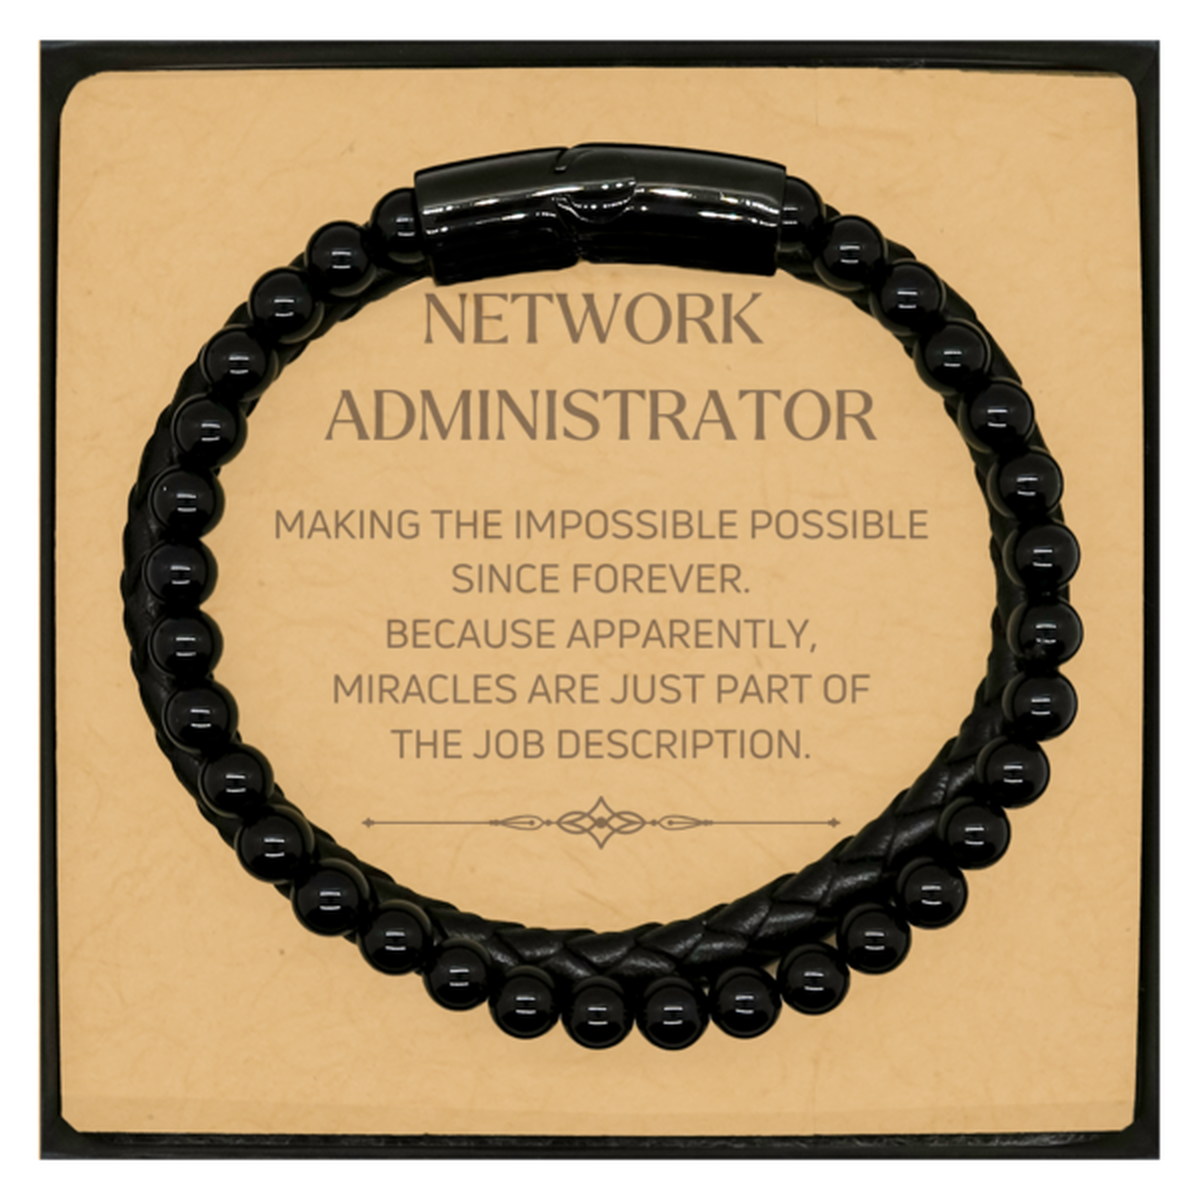 Funny Network Administrator Gifts, Miracles are just part of the job description, Inspirational Birthday Christmas Stone Leather Bracelets For Network Administrator, Men, Women, Coworkers, Friends, Boss